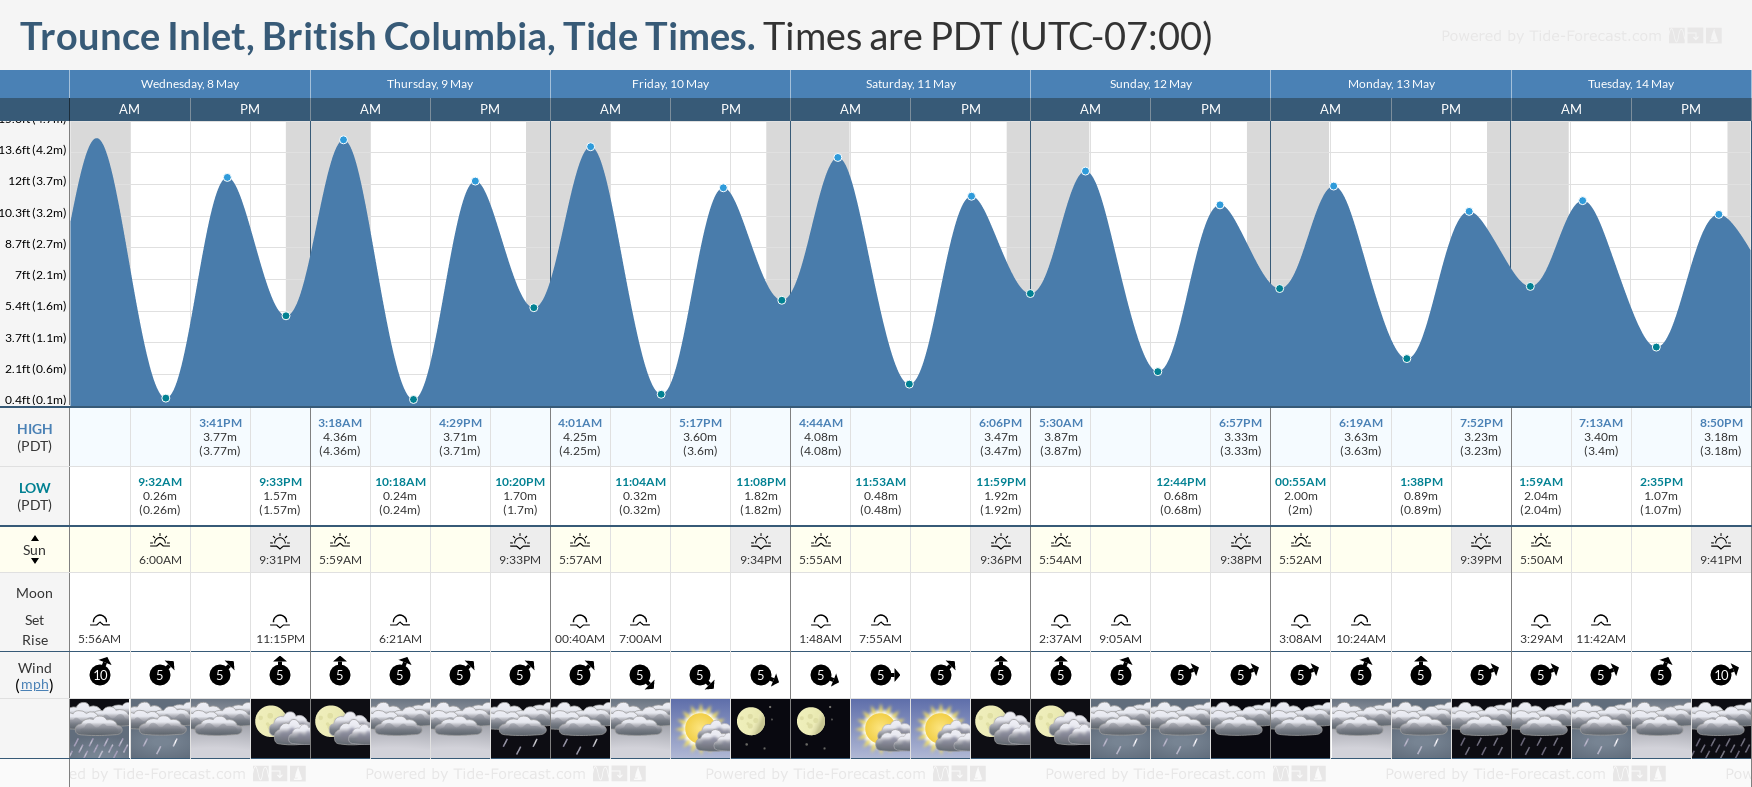 Trounce Inlet, British Columbia Tide Chart including high and low tide tide times for the next 7 days